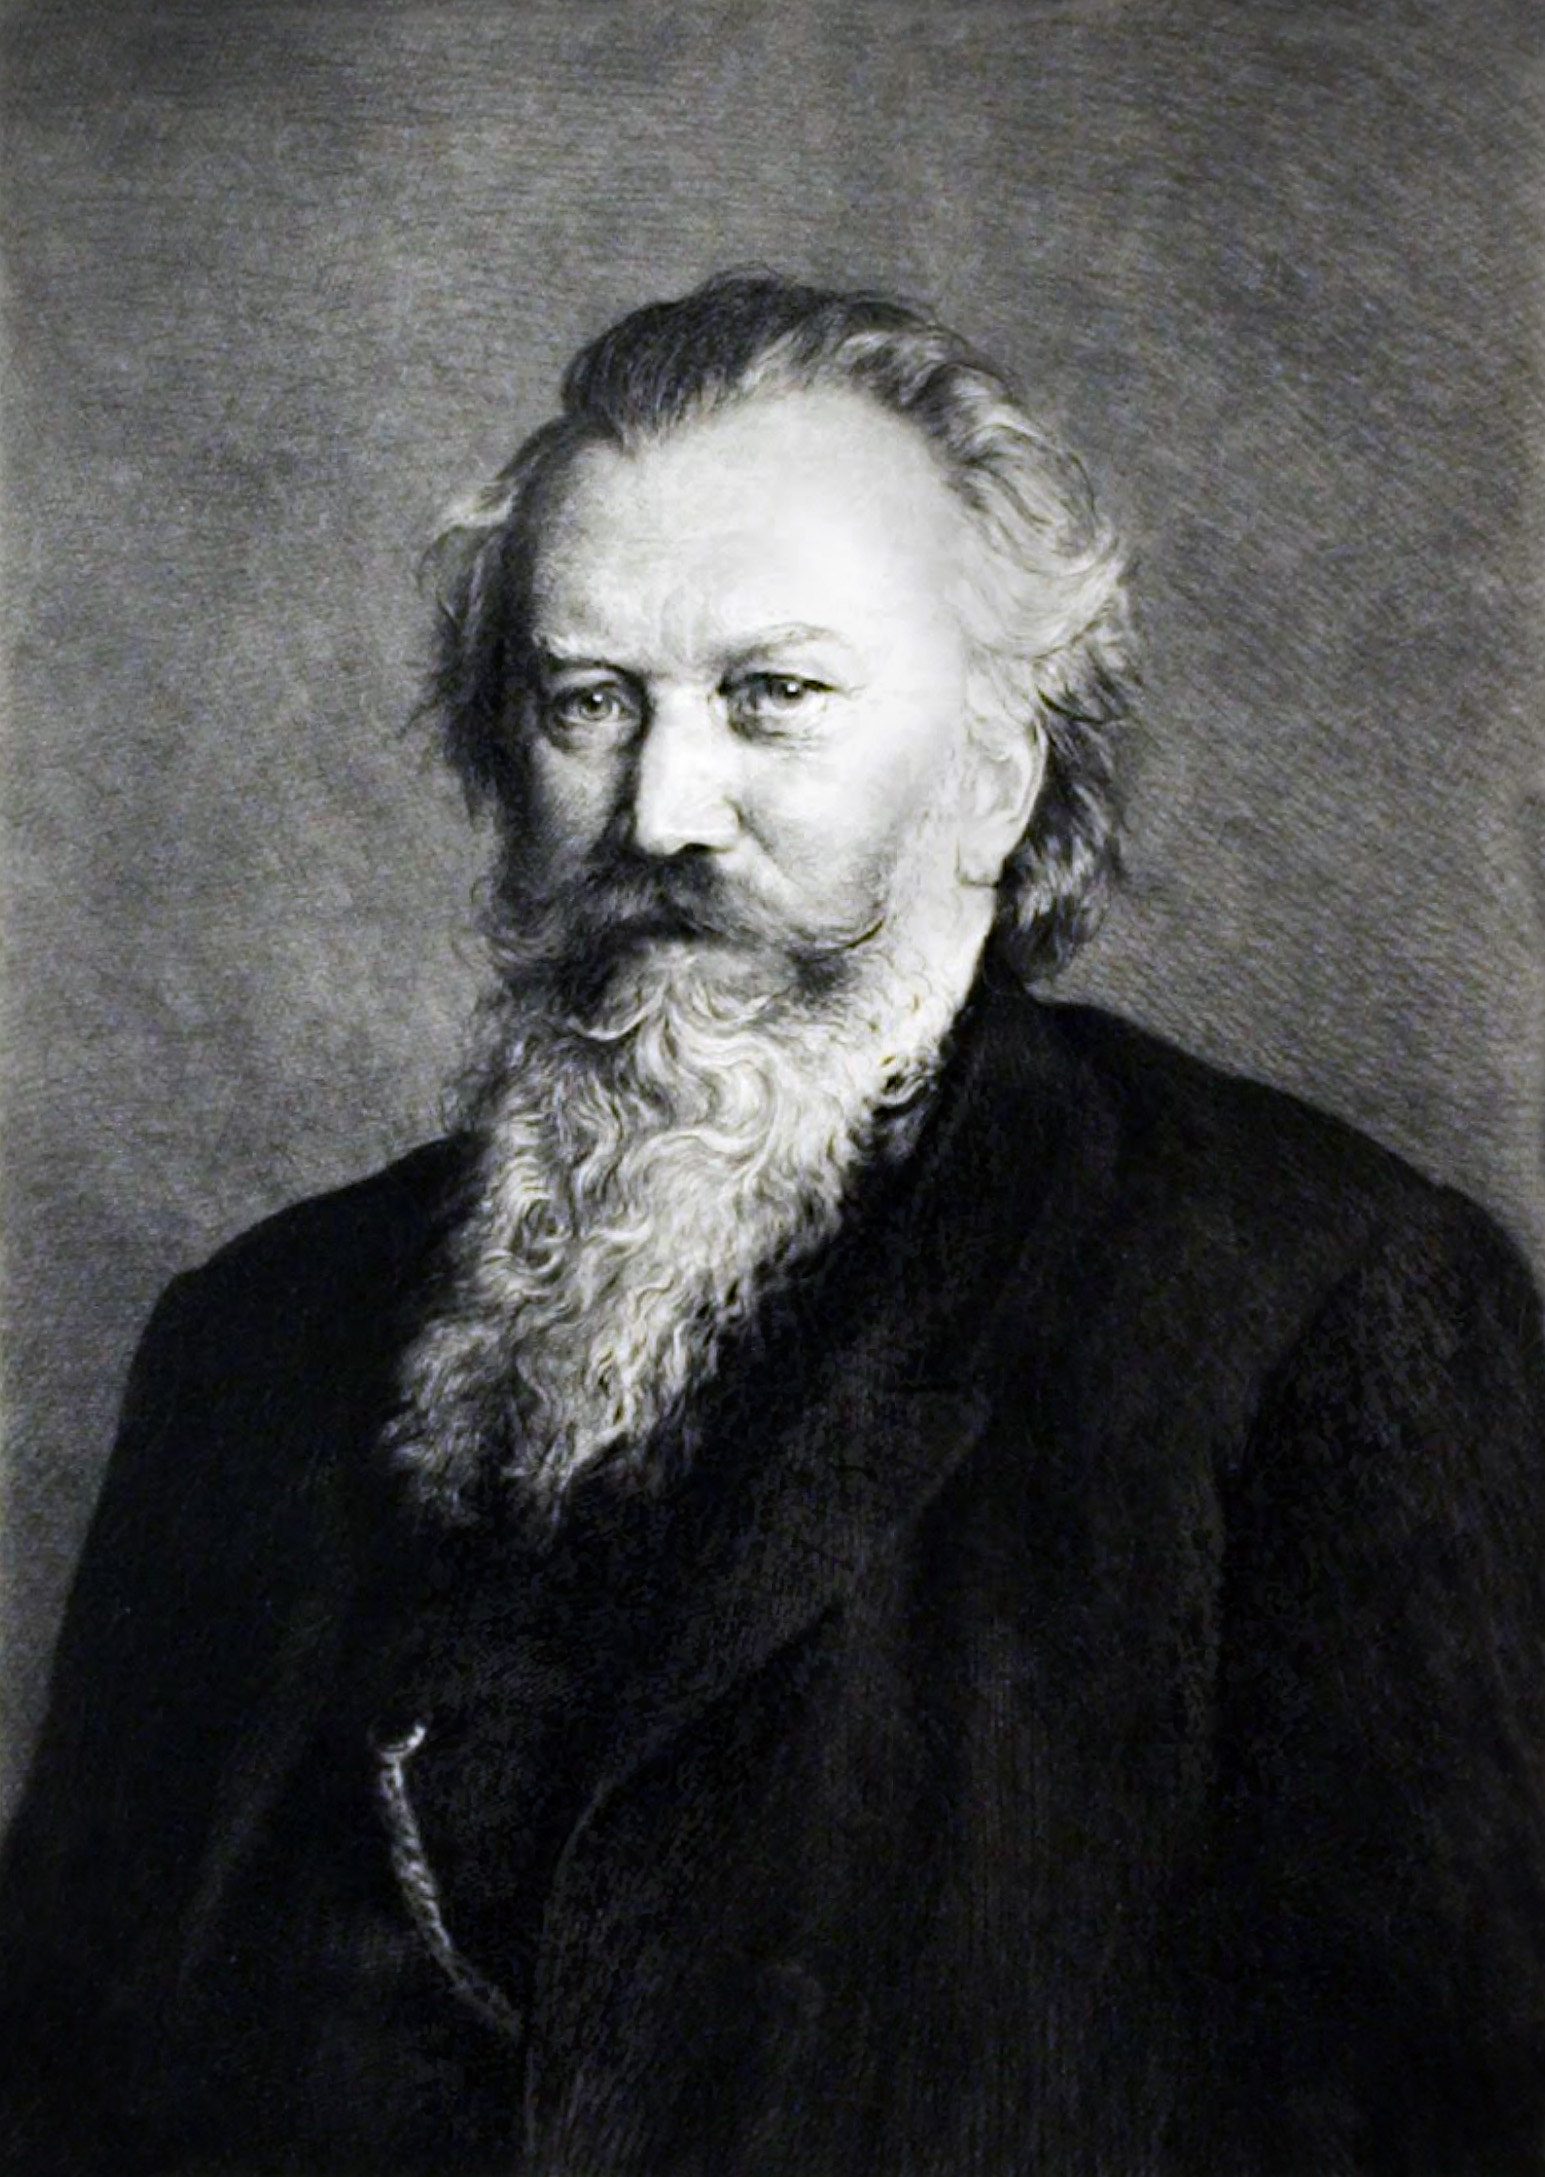 Johannes Brahms | Portrait during his latter years | Royal College of Music